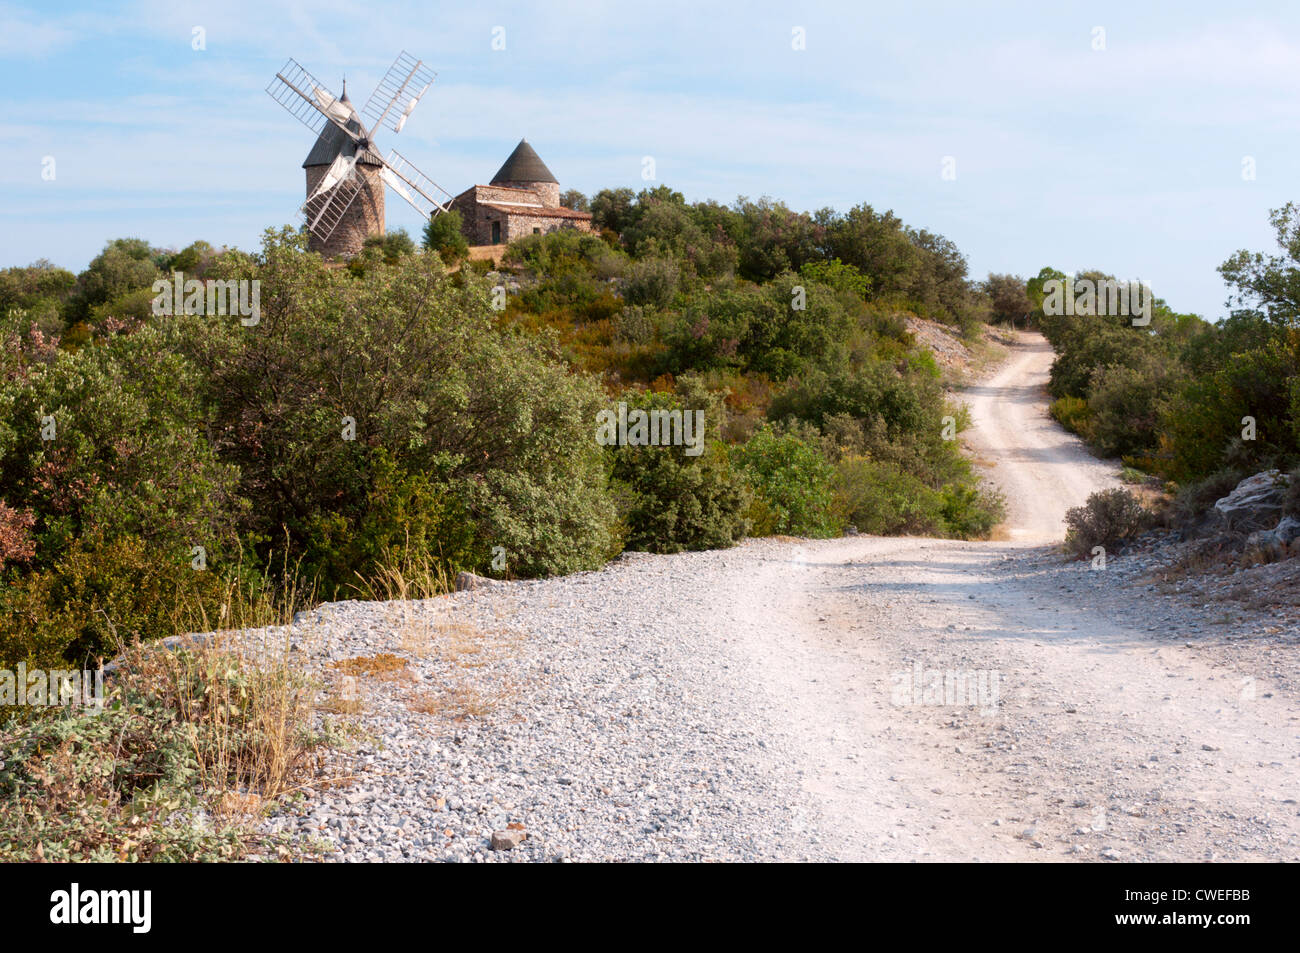 Track leading to a restored windmill near Faugeres in the Haut-Languedoc Natural Park, France. Stock Photo